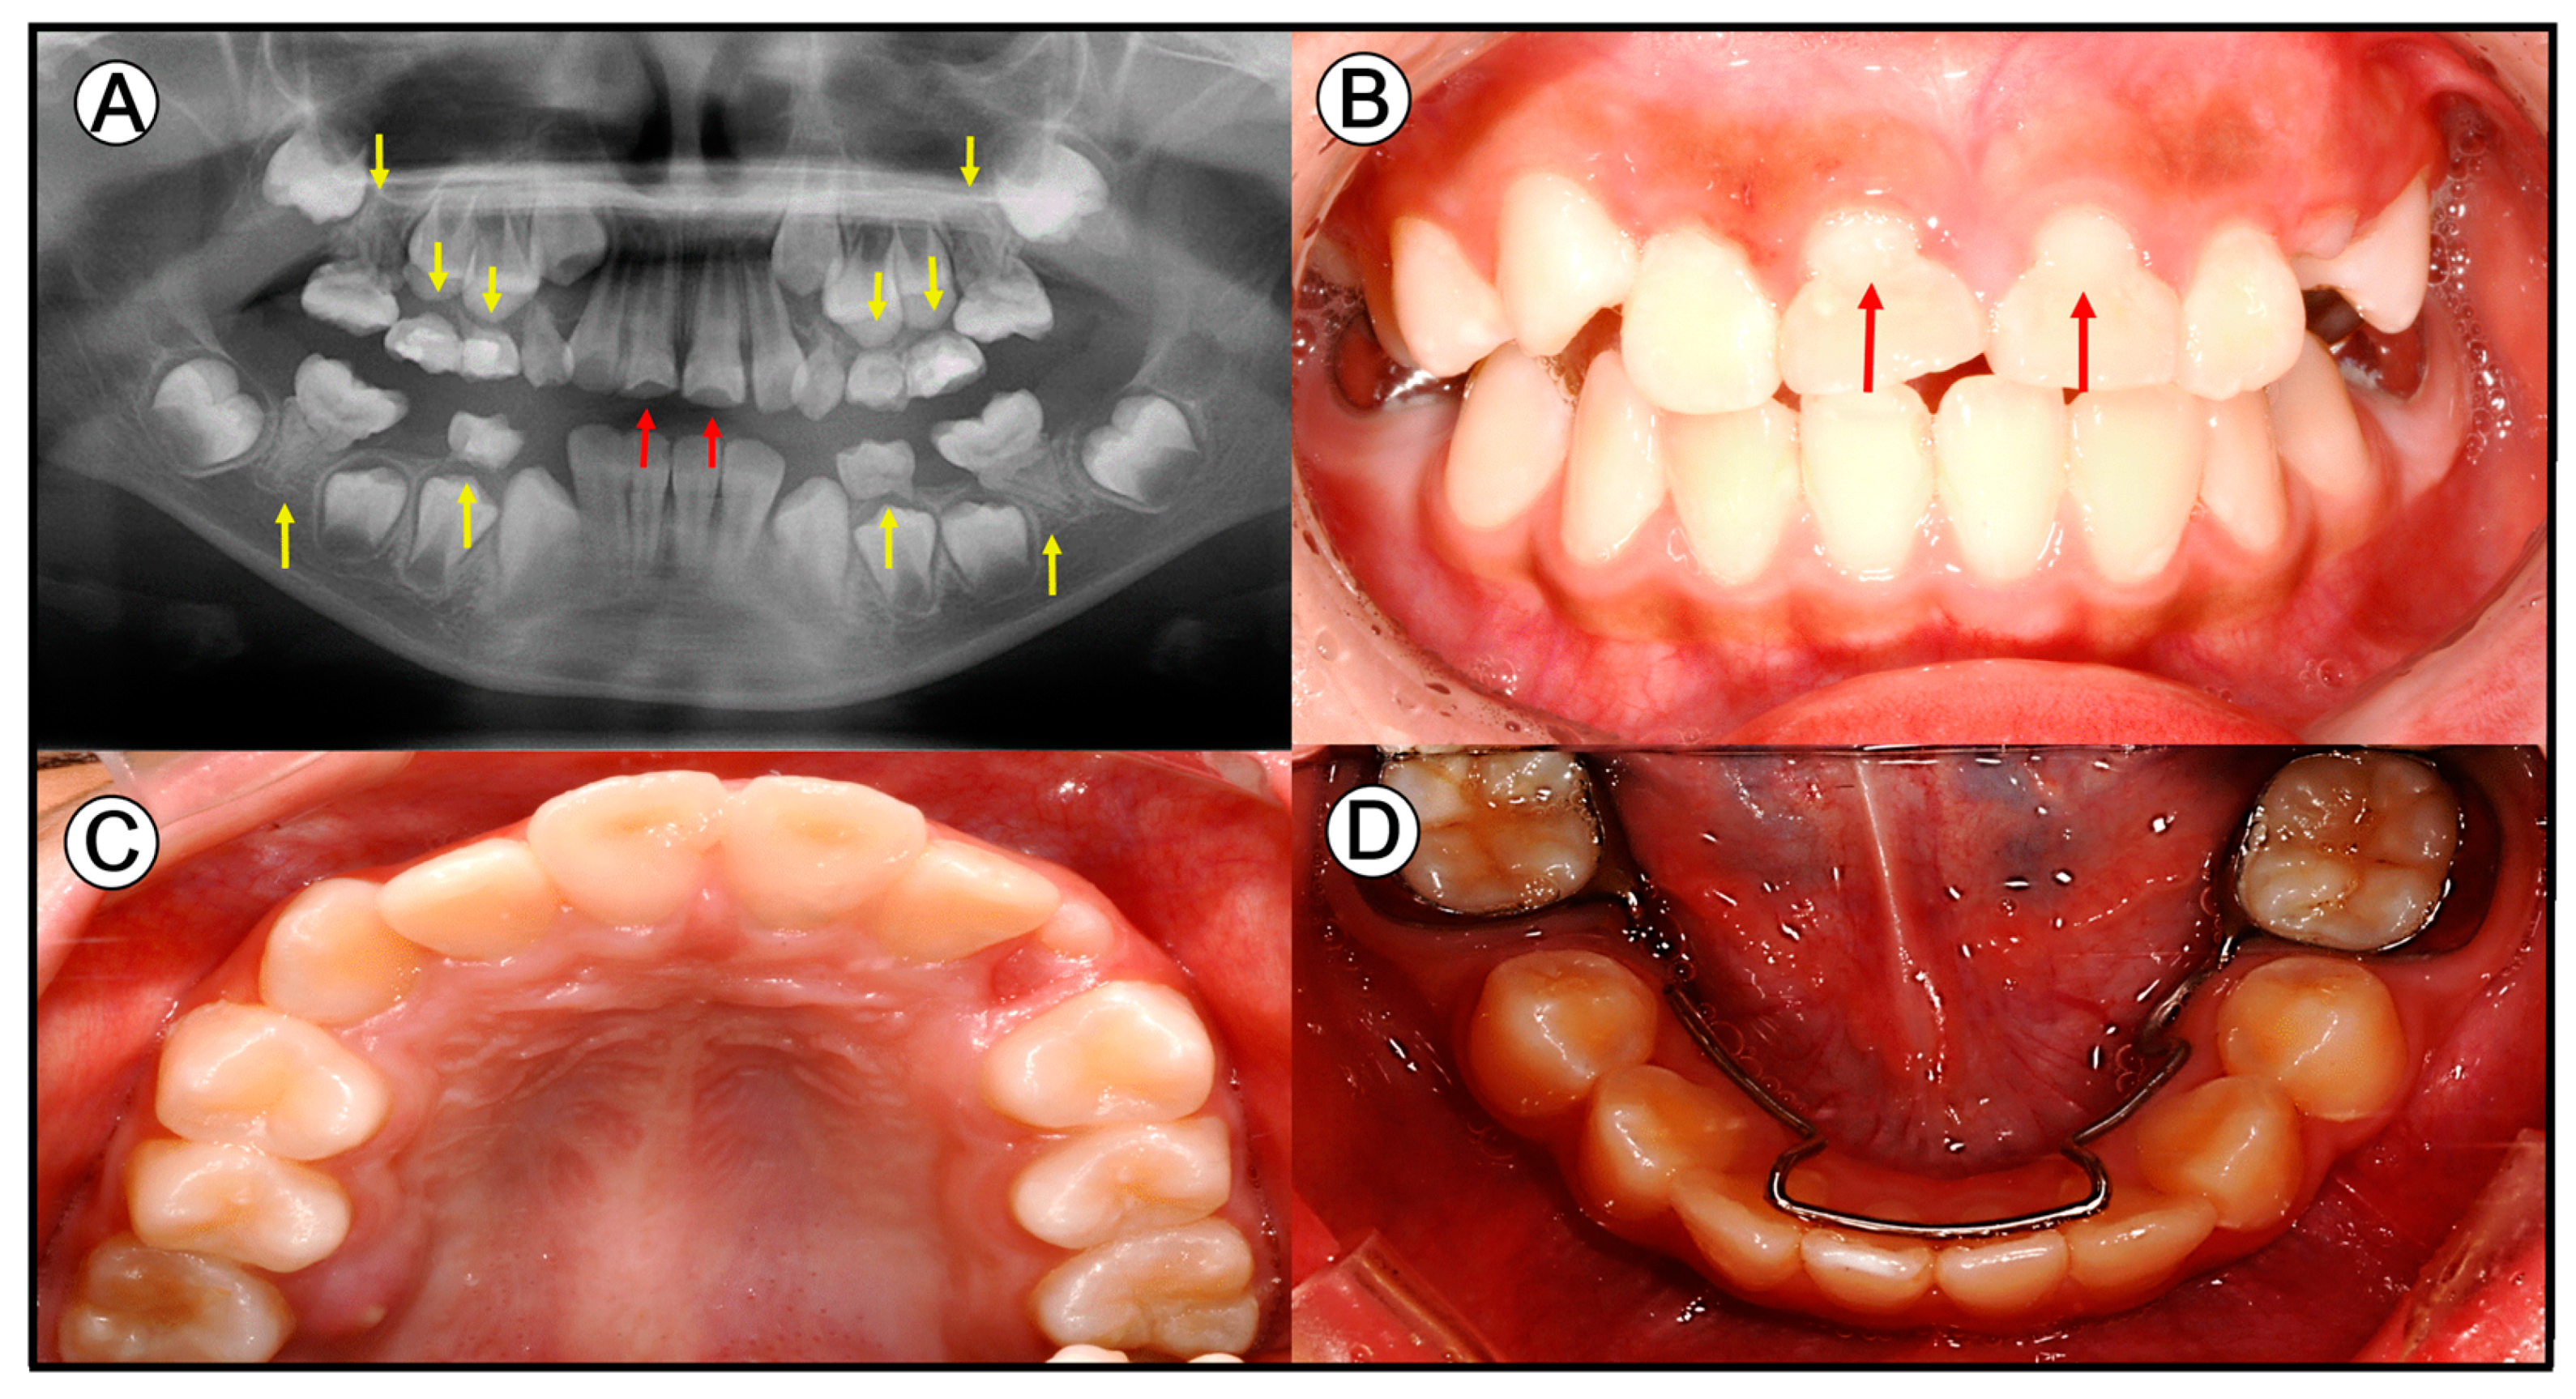 Comparison of dental anomalies between the groups with impacted